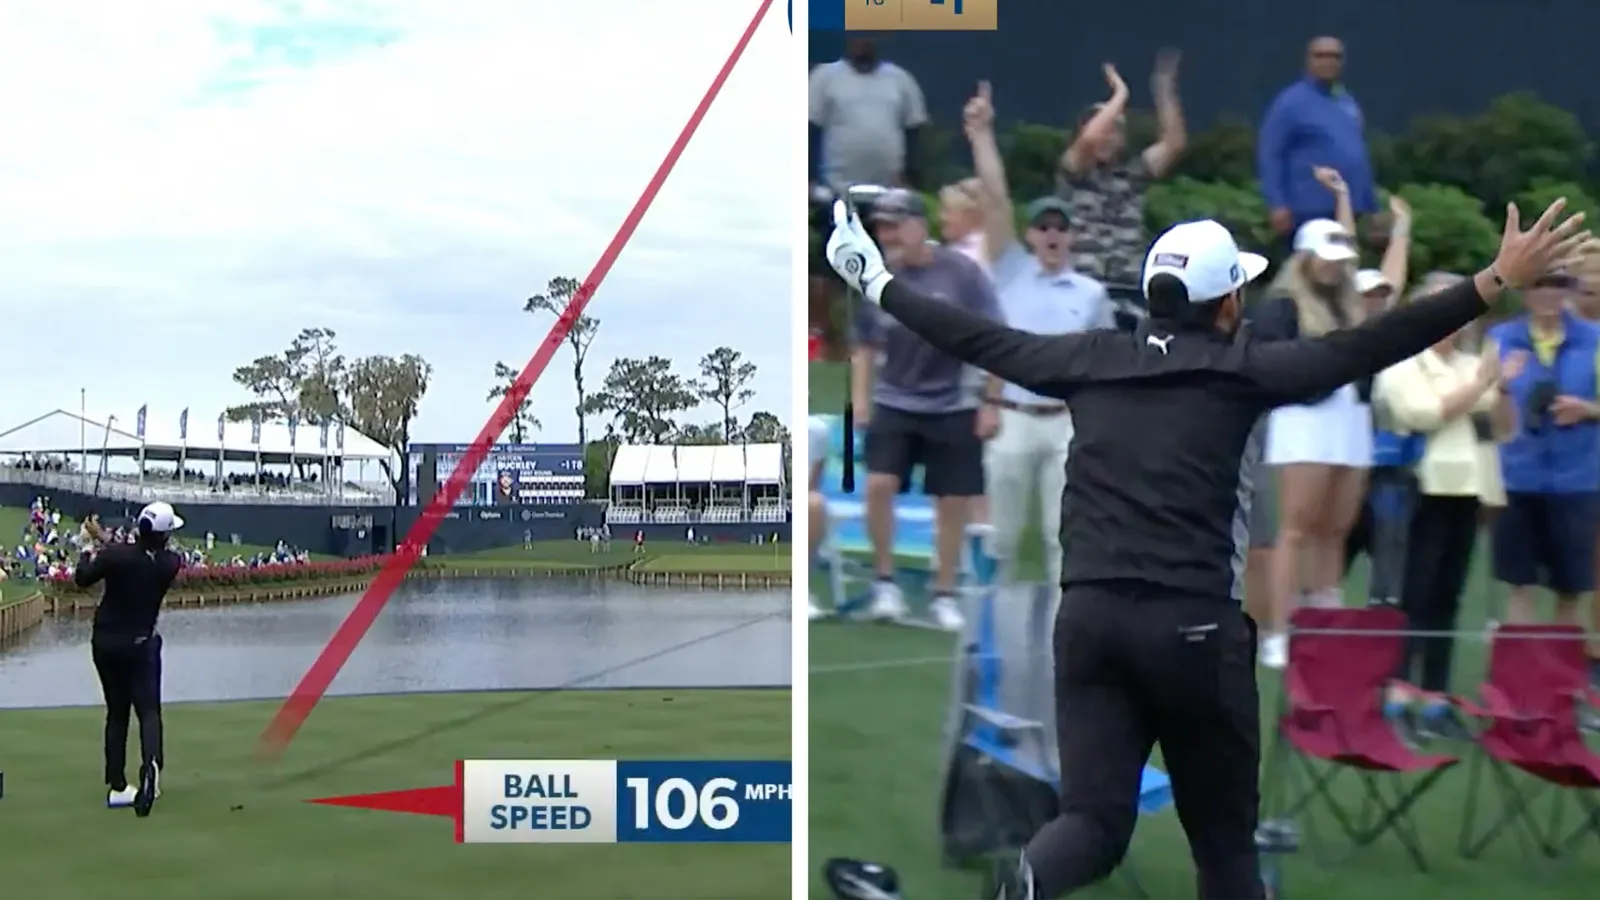 Hayden Buckley Makes Hole-In-One On Iconic 17th At The Players Championship